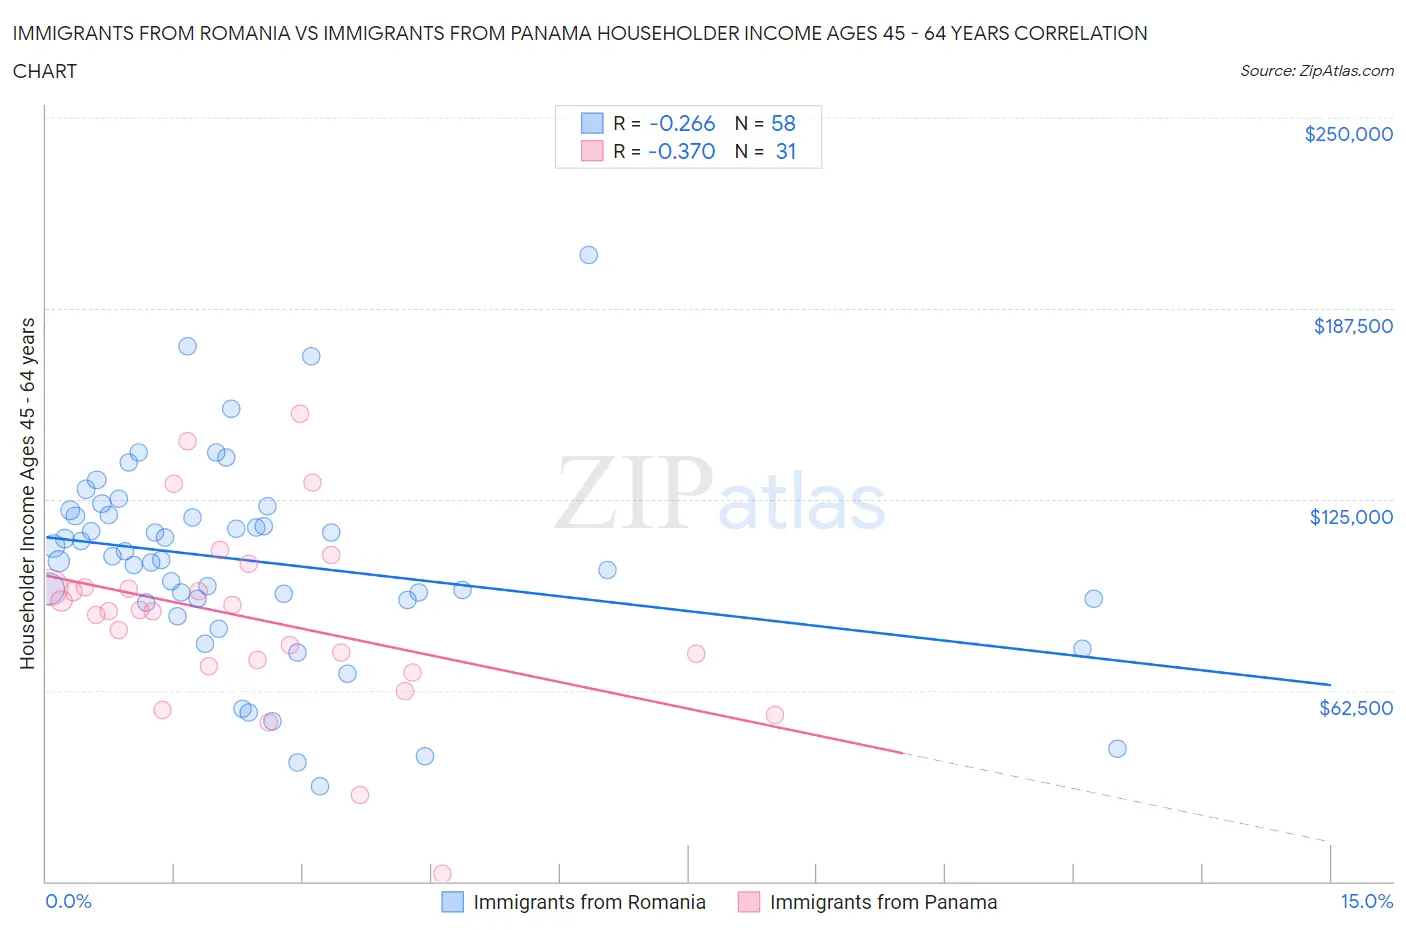 Immigrants from Romania vs Immigrants from Panama Householder Income Ages 45 - 64 years